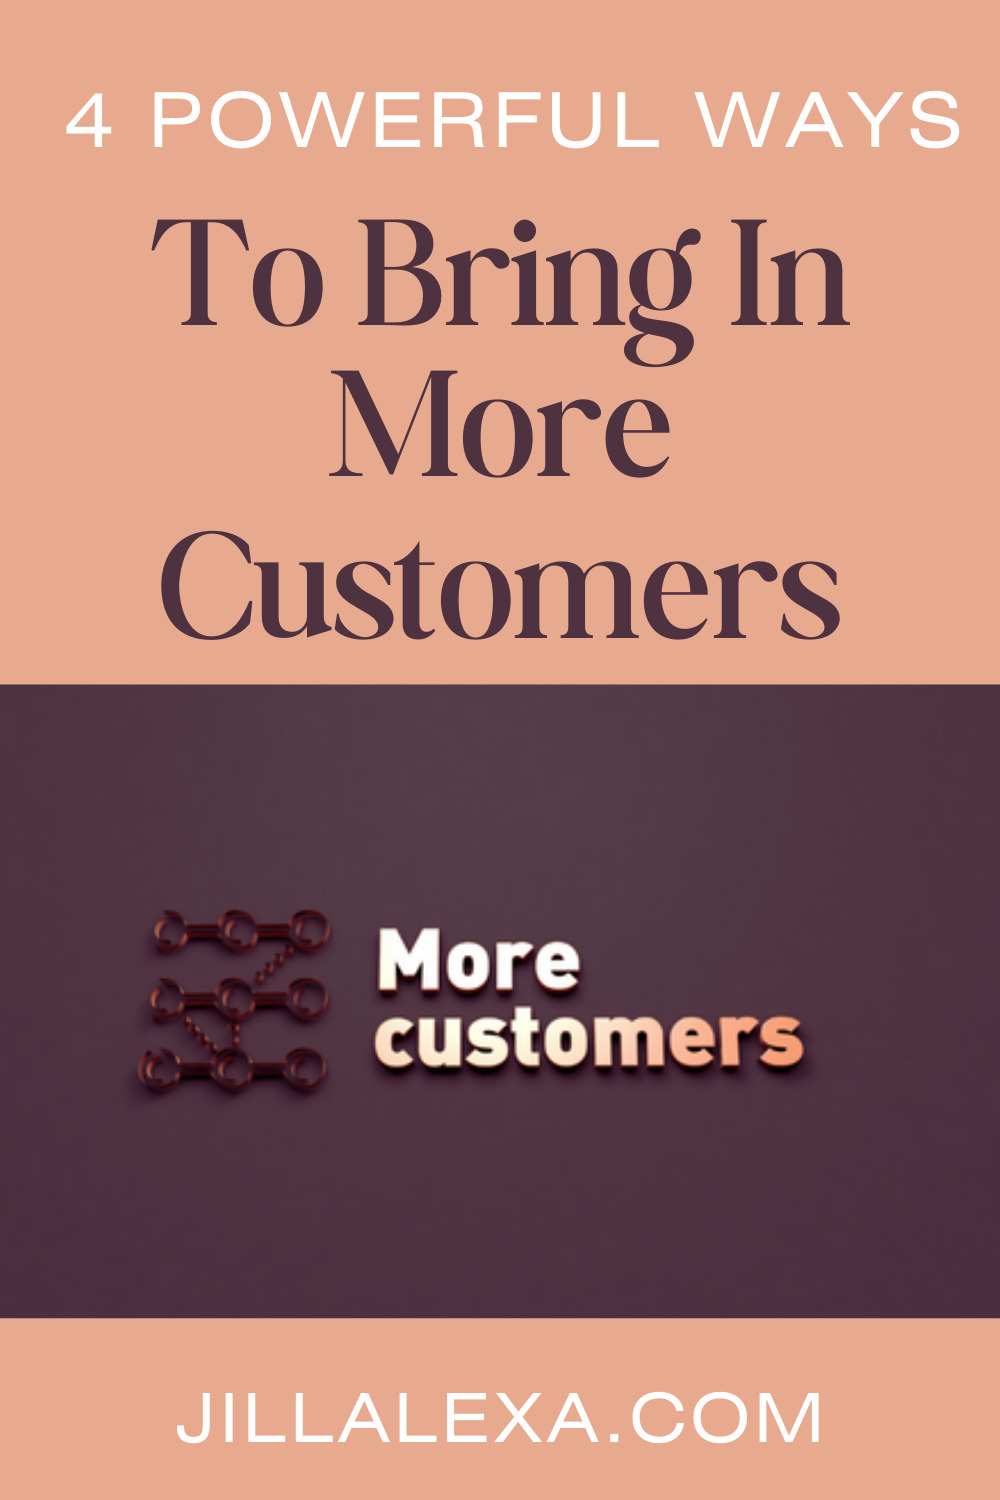 Focusing on all the ways to bring in more customers is essential to your business growth. Here are 4 powerful ways to bring in as many customers as possible.